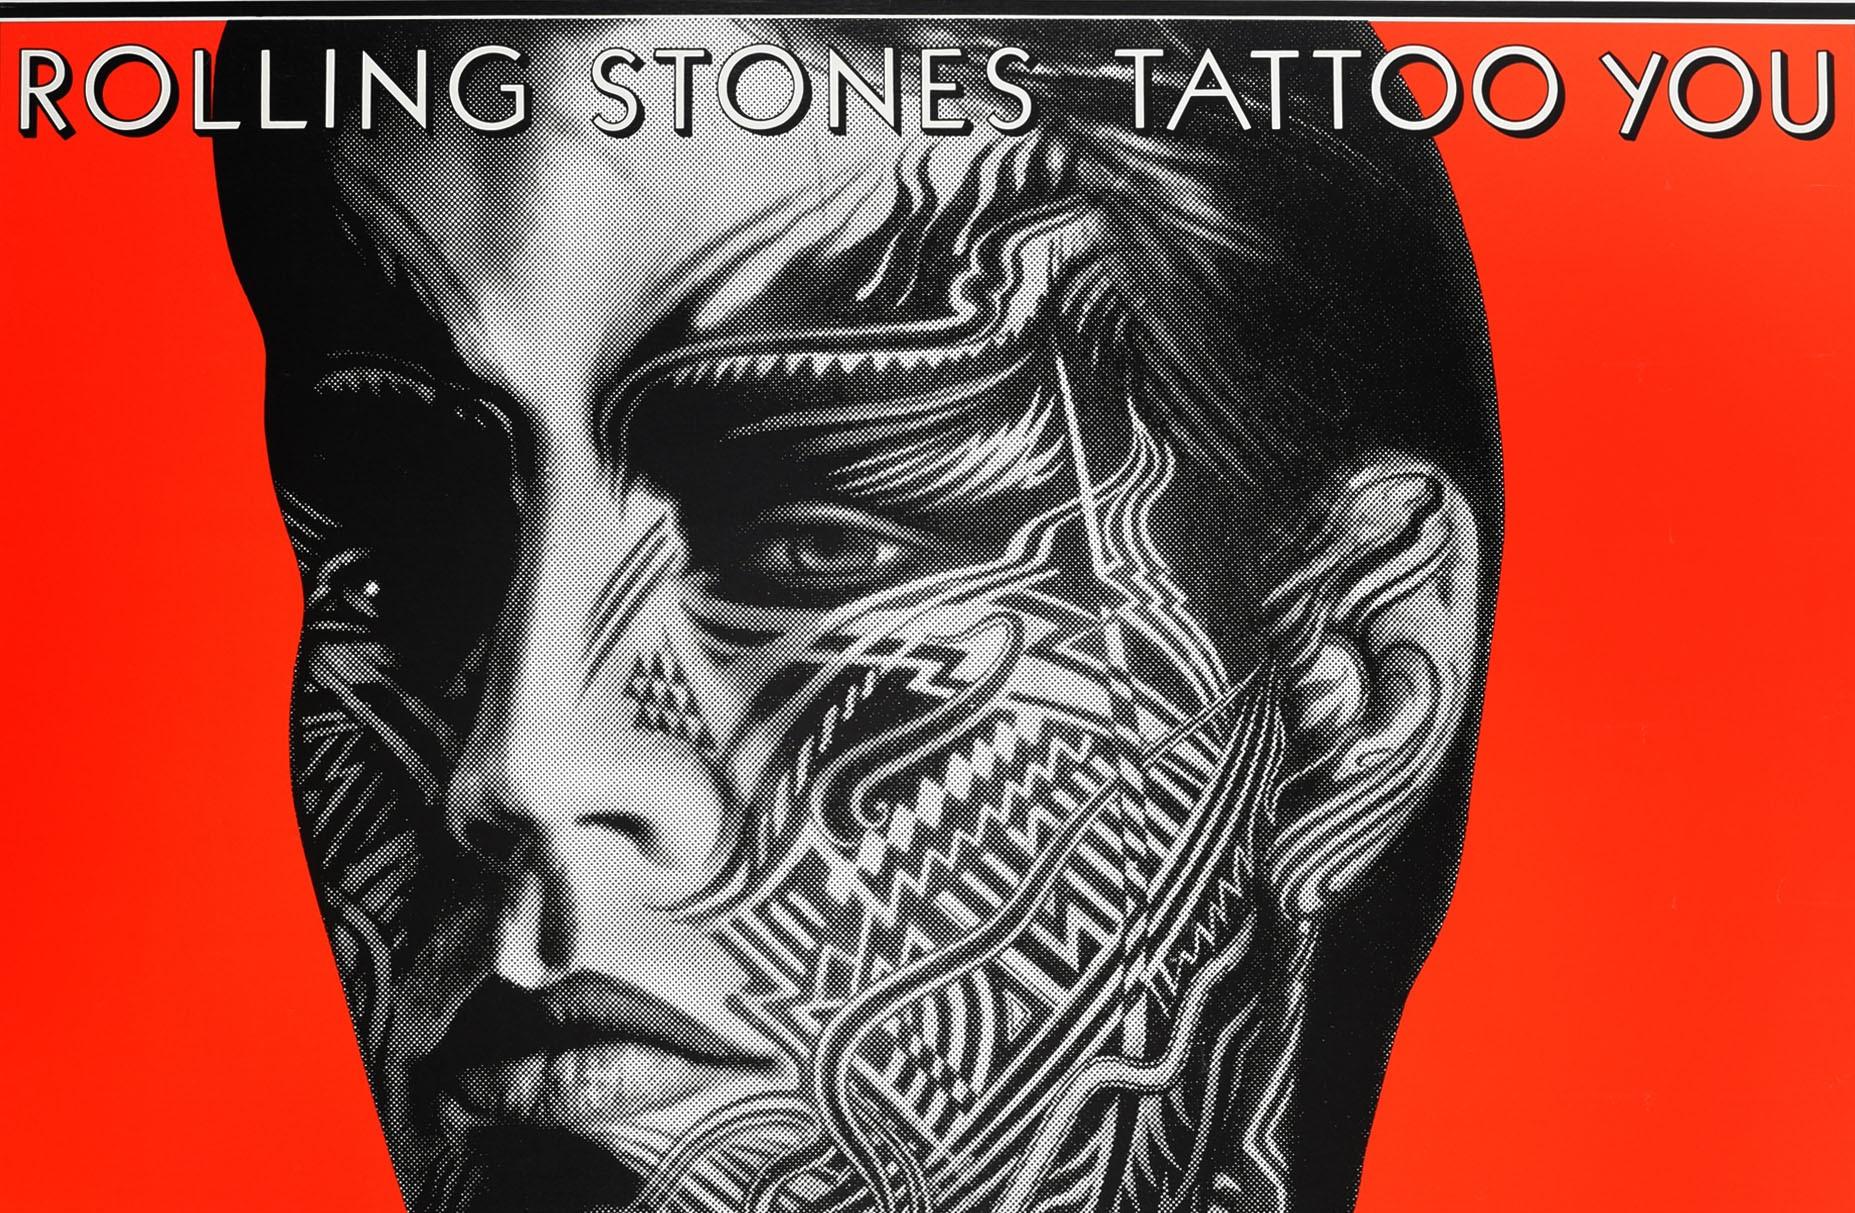 Original Vintage Mick Jagger Poster The Rolling Stones Tattoo You Album Design - Print by Peter Corriston